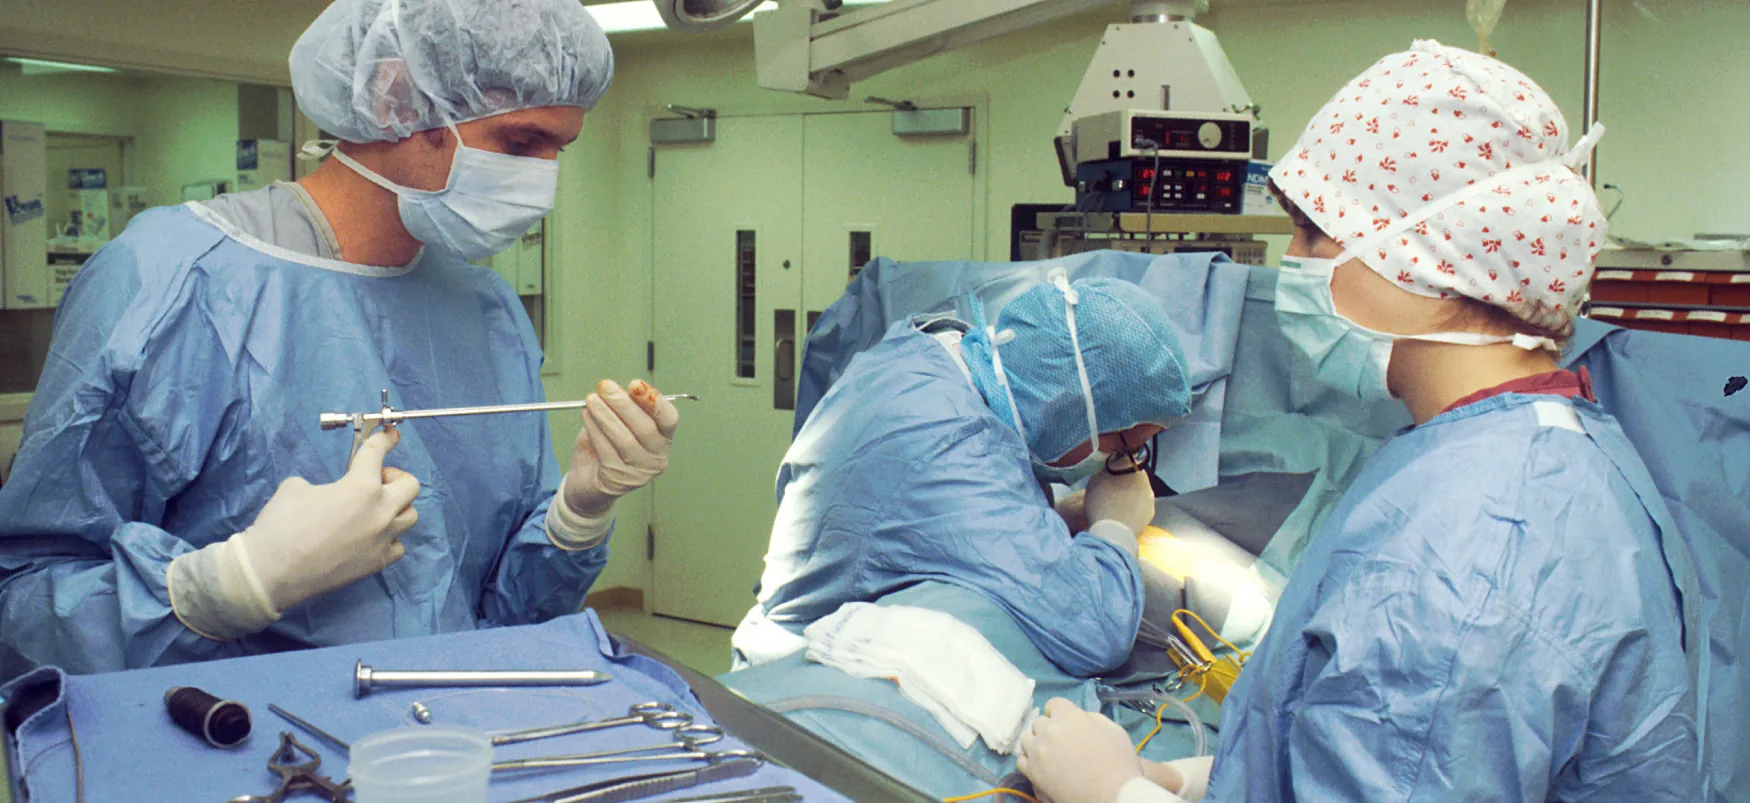 Three medical professionals wearing personal protective equipment prepare instruments in an operating rooms.